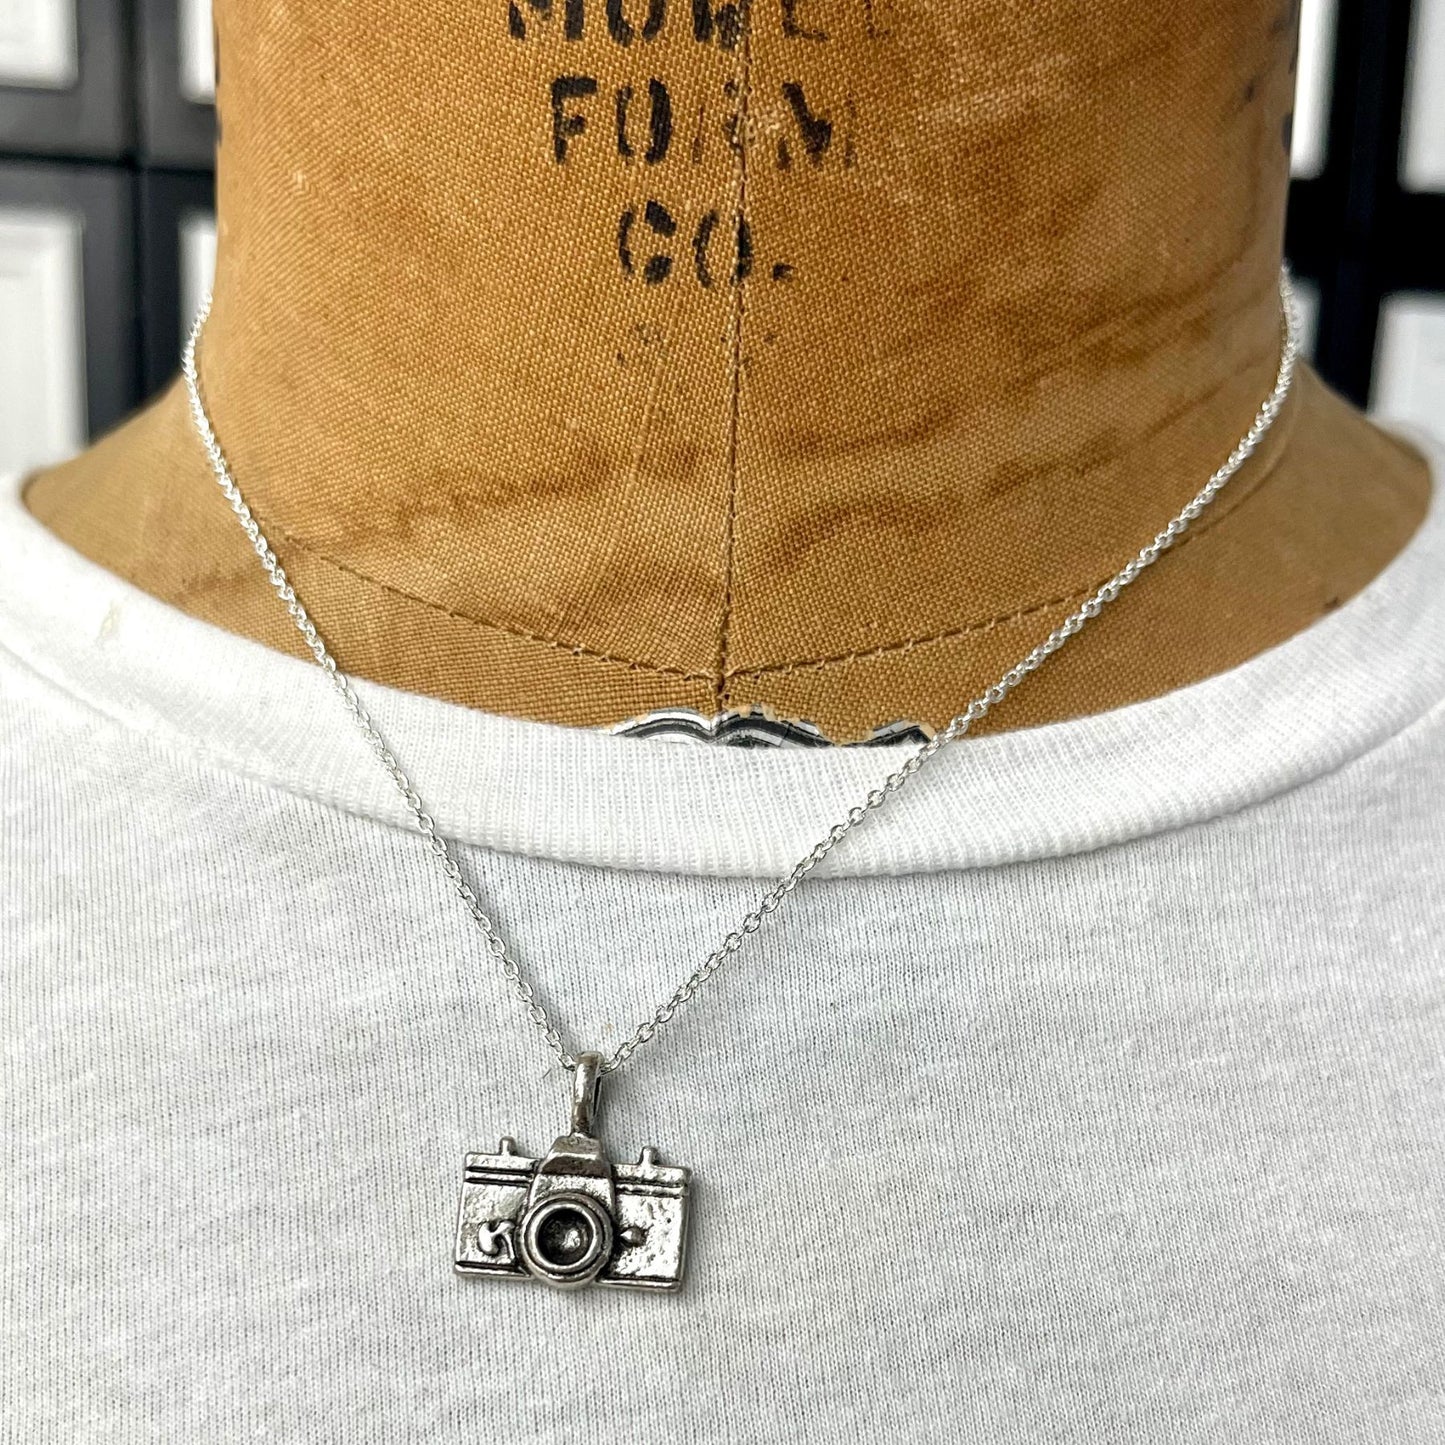 Take a Picture It Lasts Longer Camera Necklace